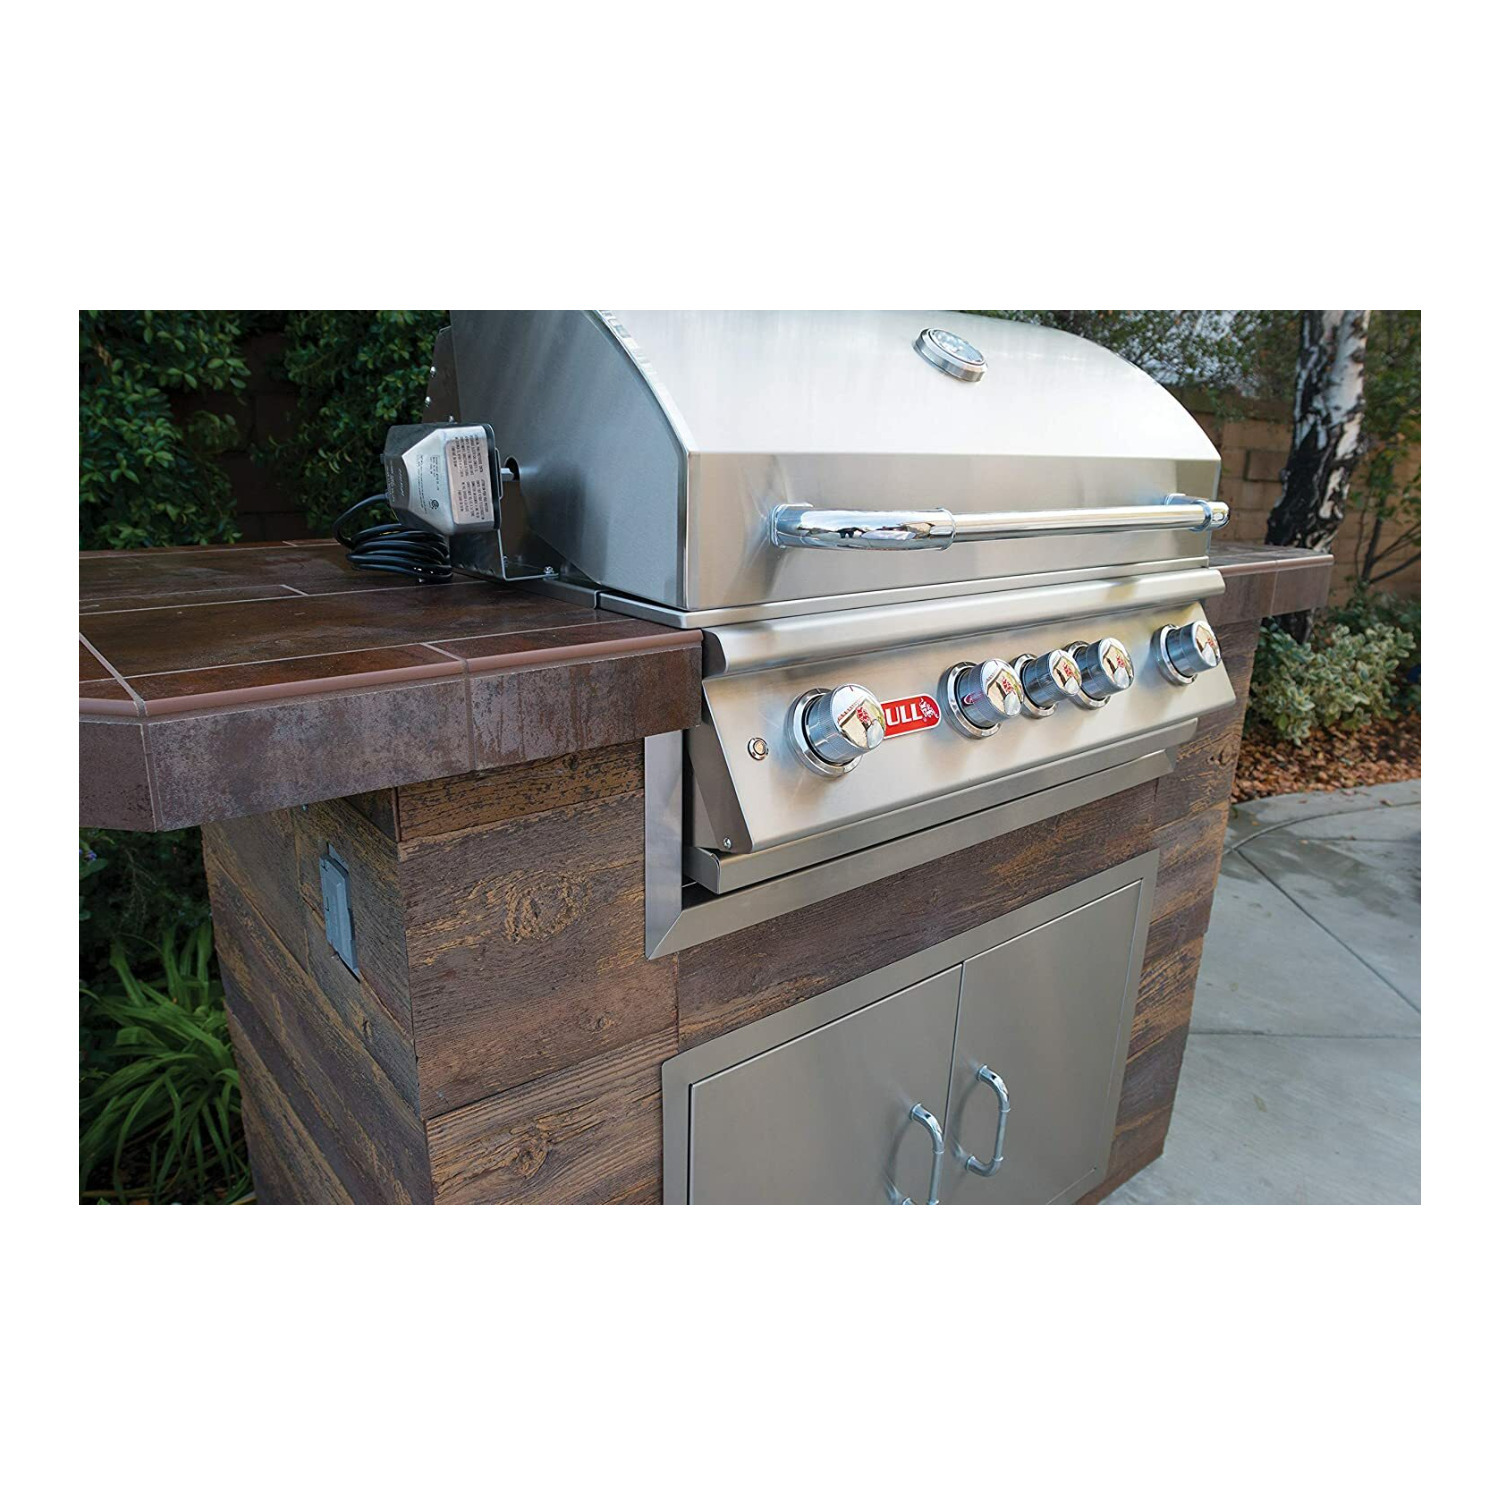 Bull Outdoor Products BBQ Angus 30-Inch Stainless Steel Drop-In Grill - image 4 of 5